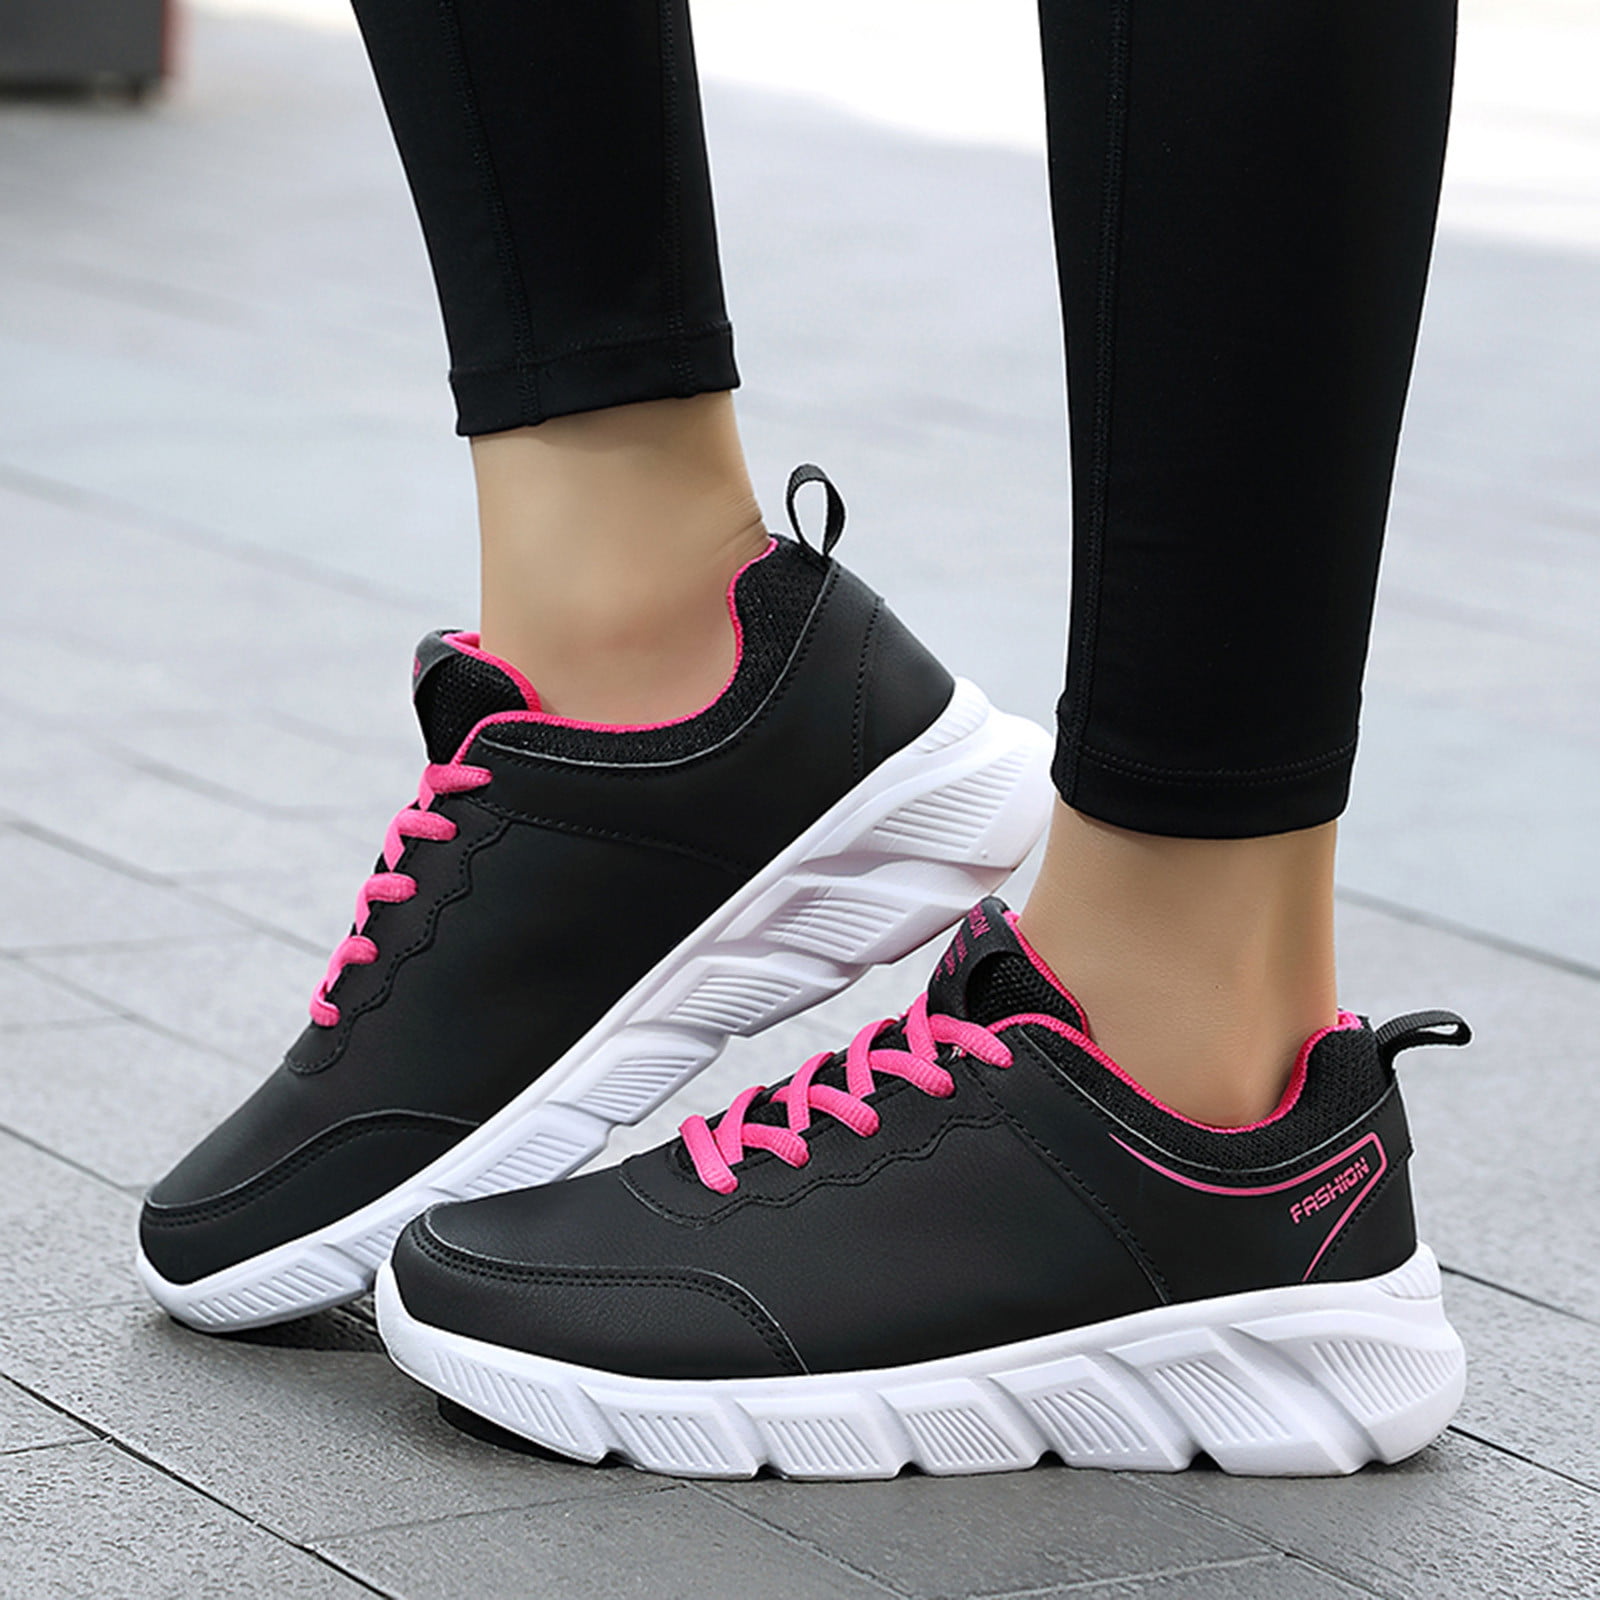 Womens Get Fit Mesh Walking Trainers Athletic Walk Gym Shoes Sport Run UK 3-9 